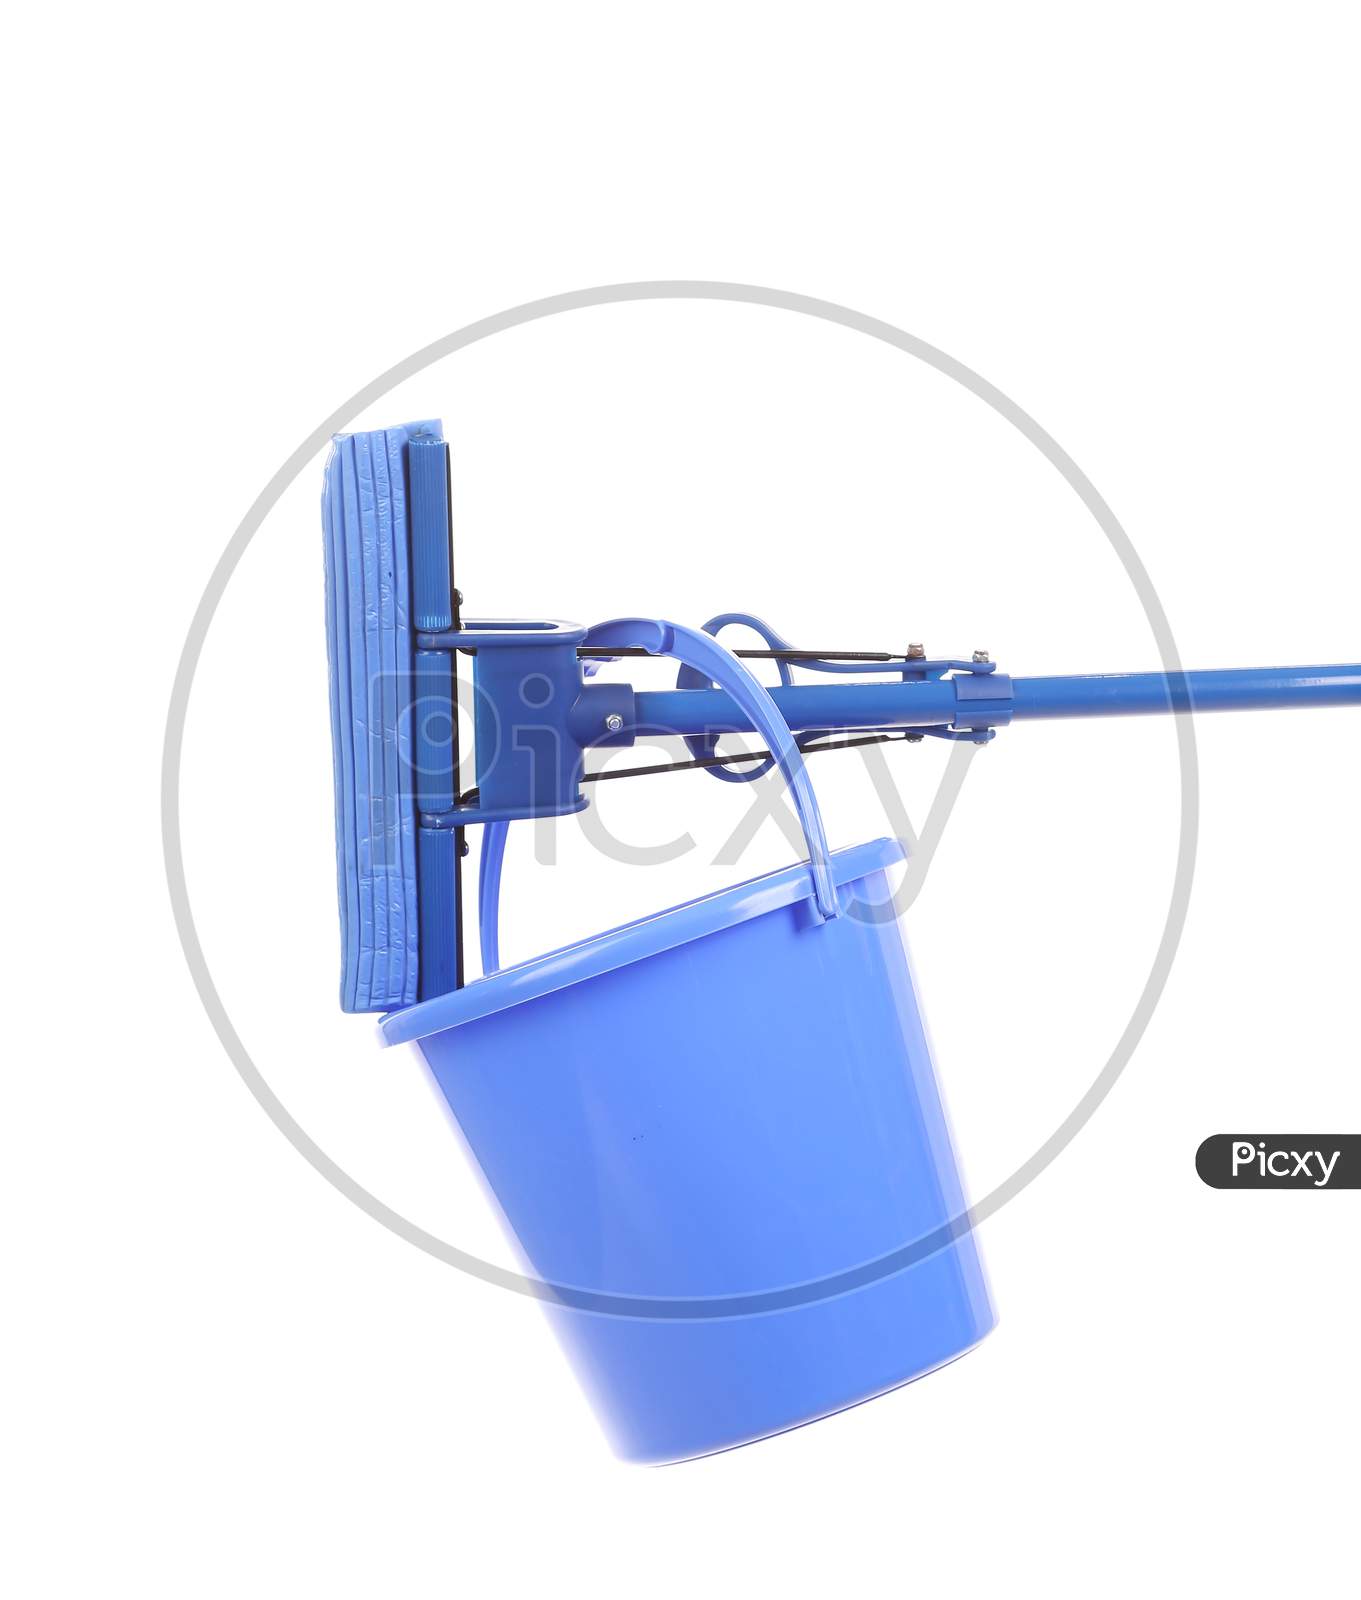 Blue Bucket With Sponge Mop. Isolated On A White Background.